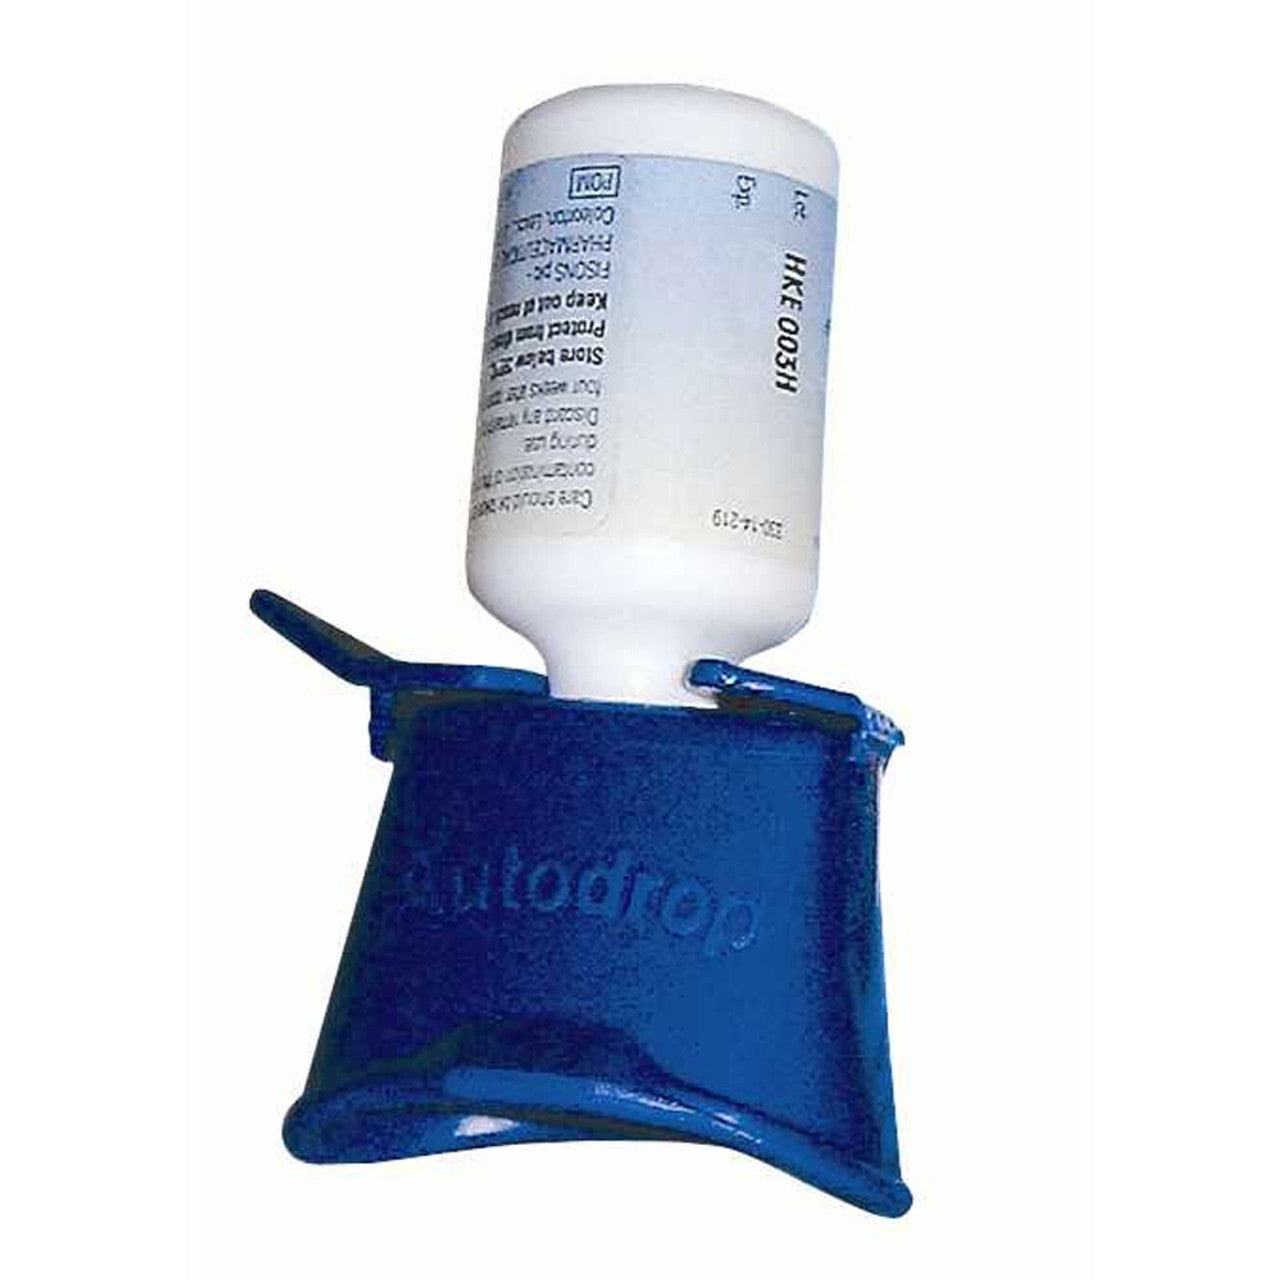 Blue Eye Drop Guide holding an eye drop bottle. The easy Eye Drop Guide clips into place over most eye drop bottles and positions the bottle at the correct angle over the eye.